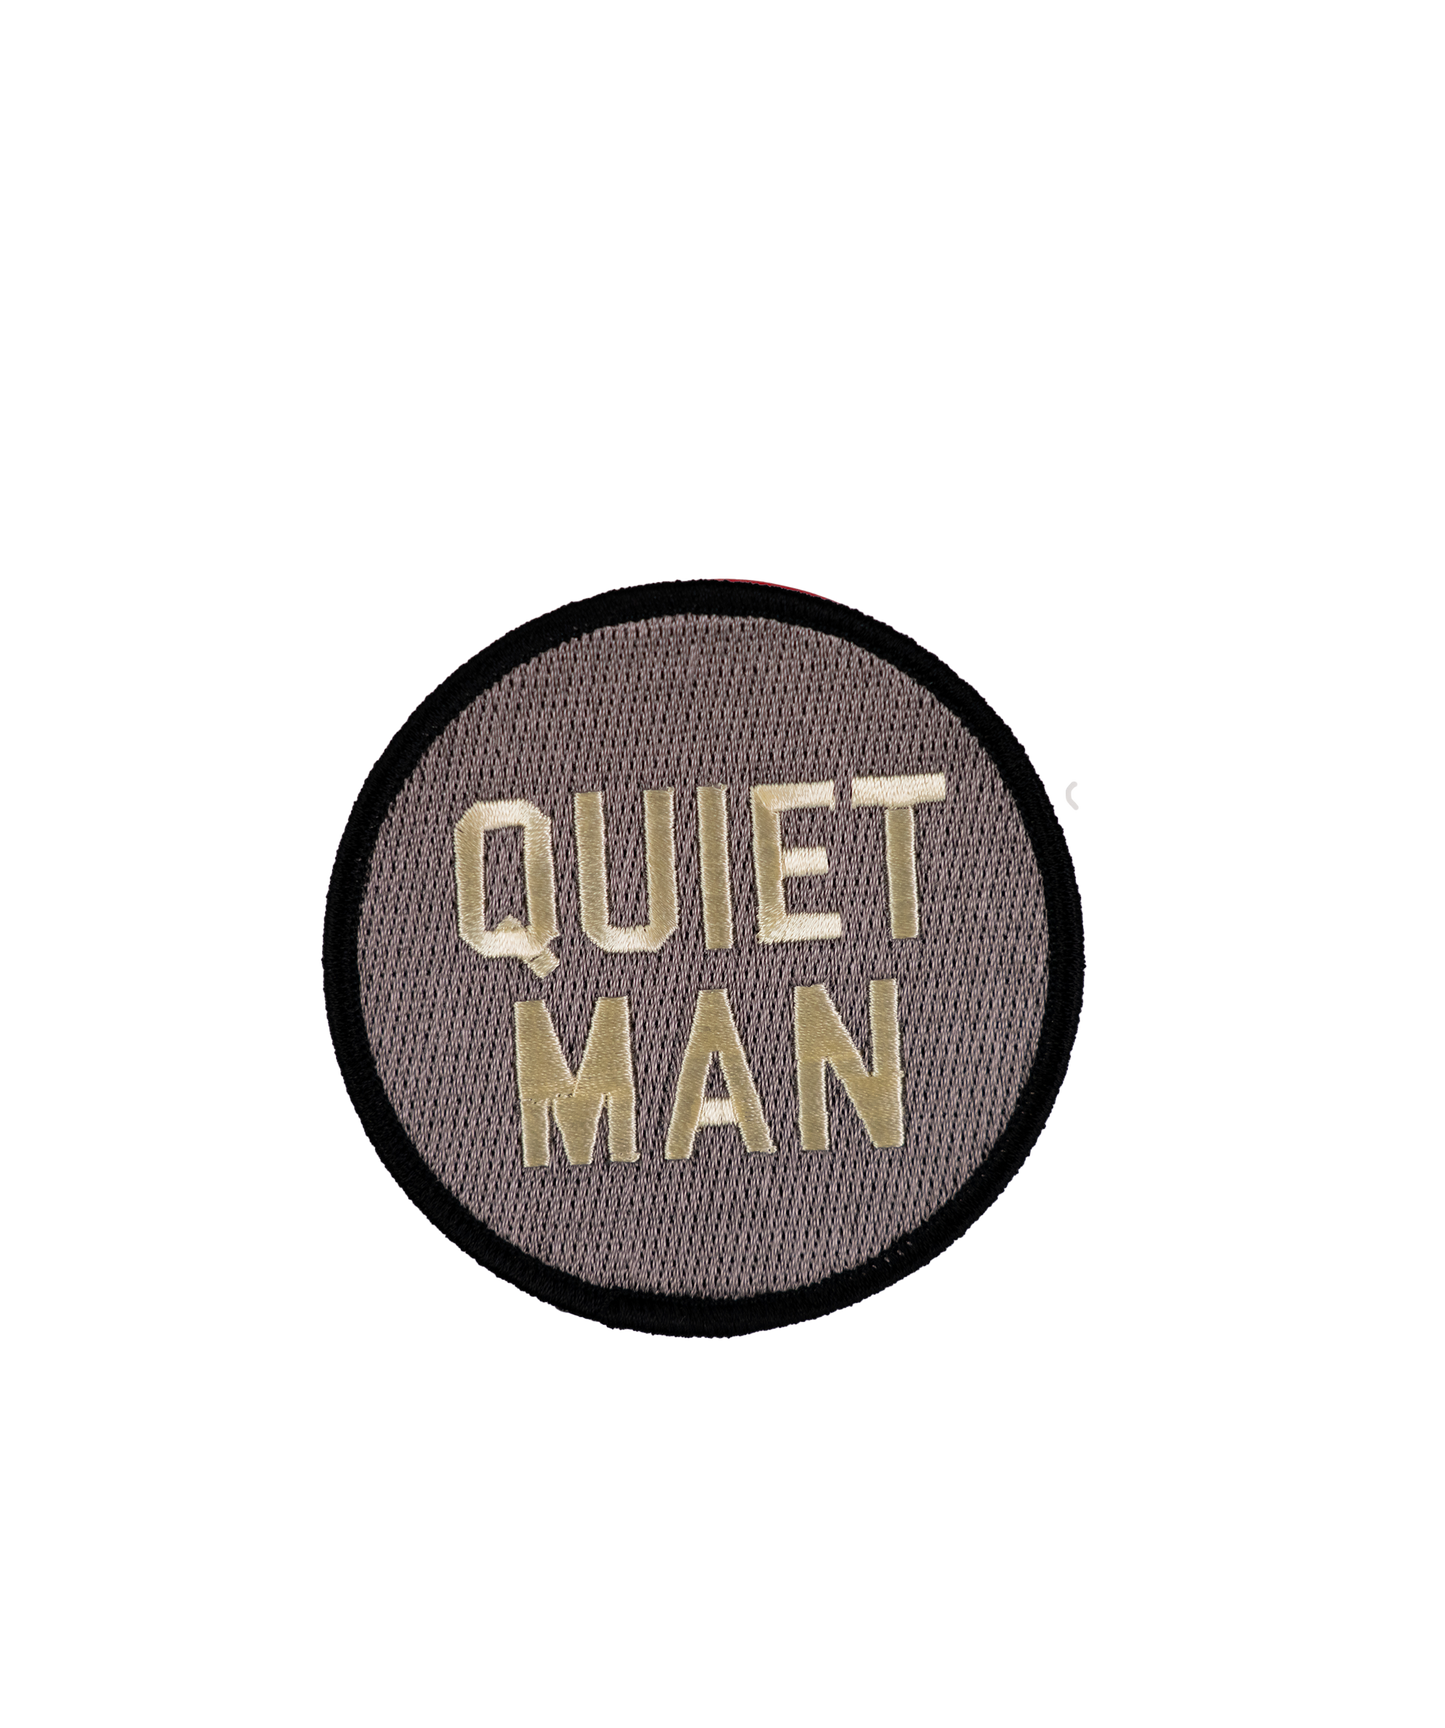 Quiet Man Embroidered Patch • John Prine x Oxford Pennant